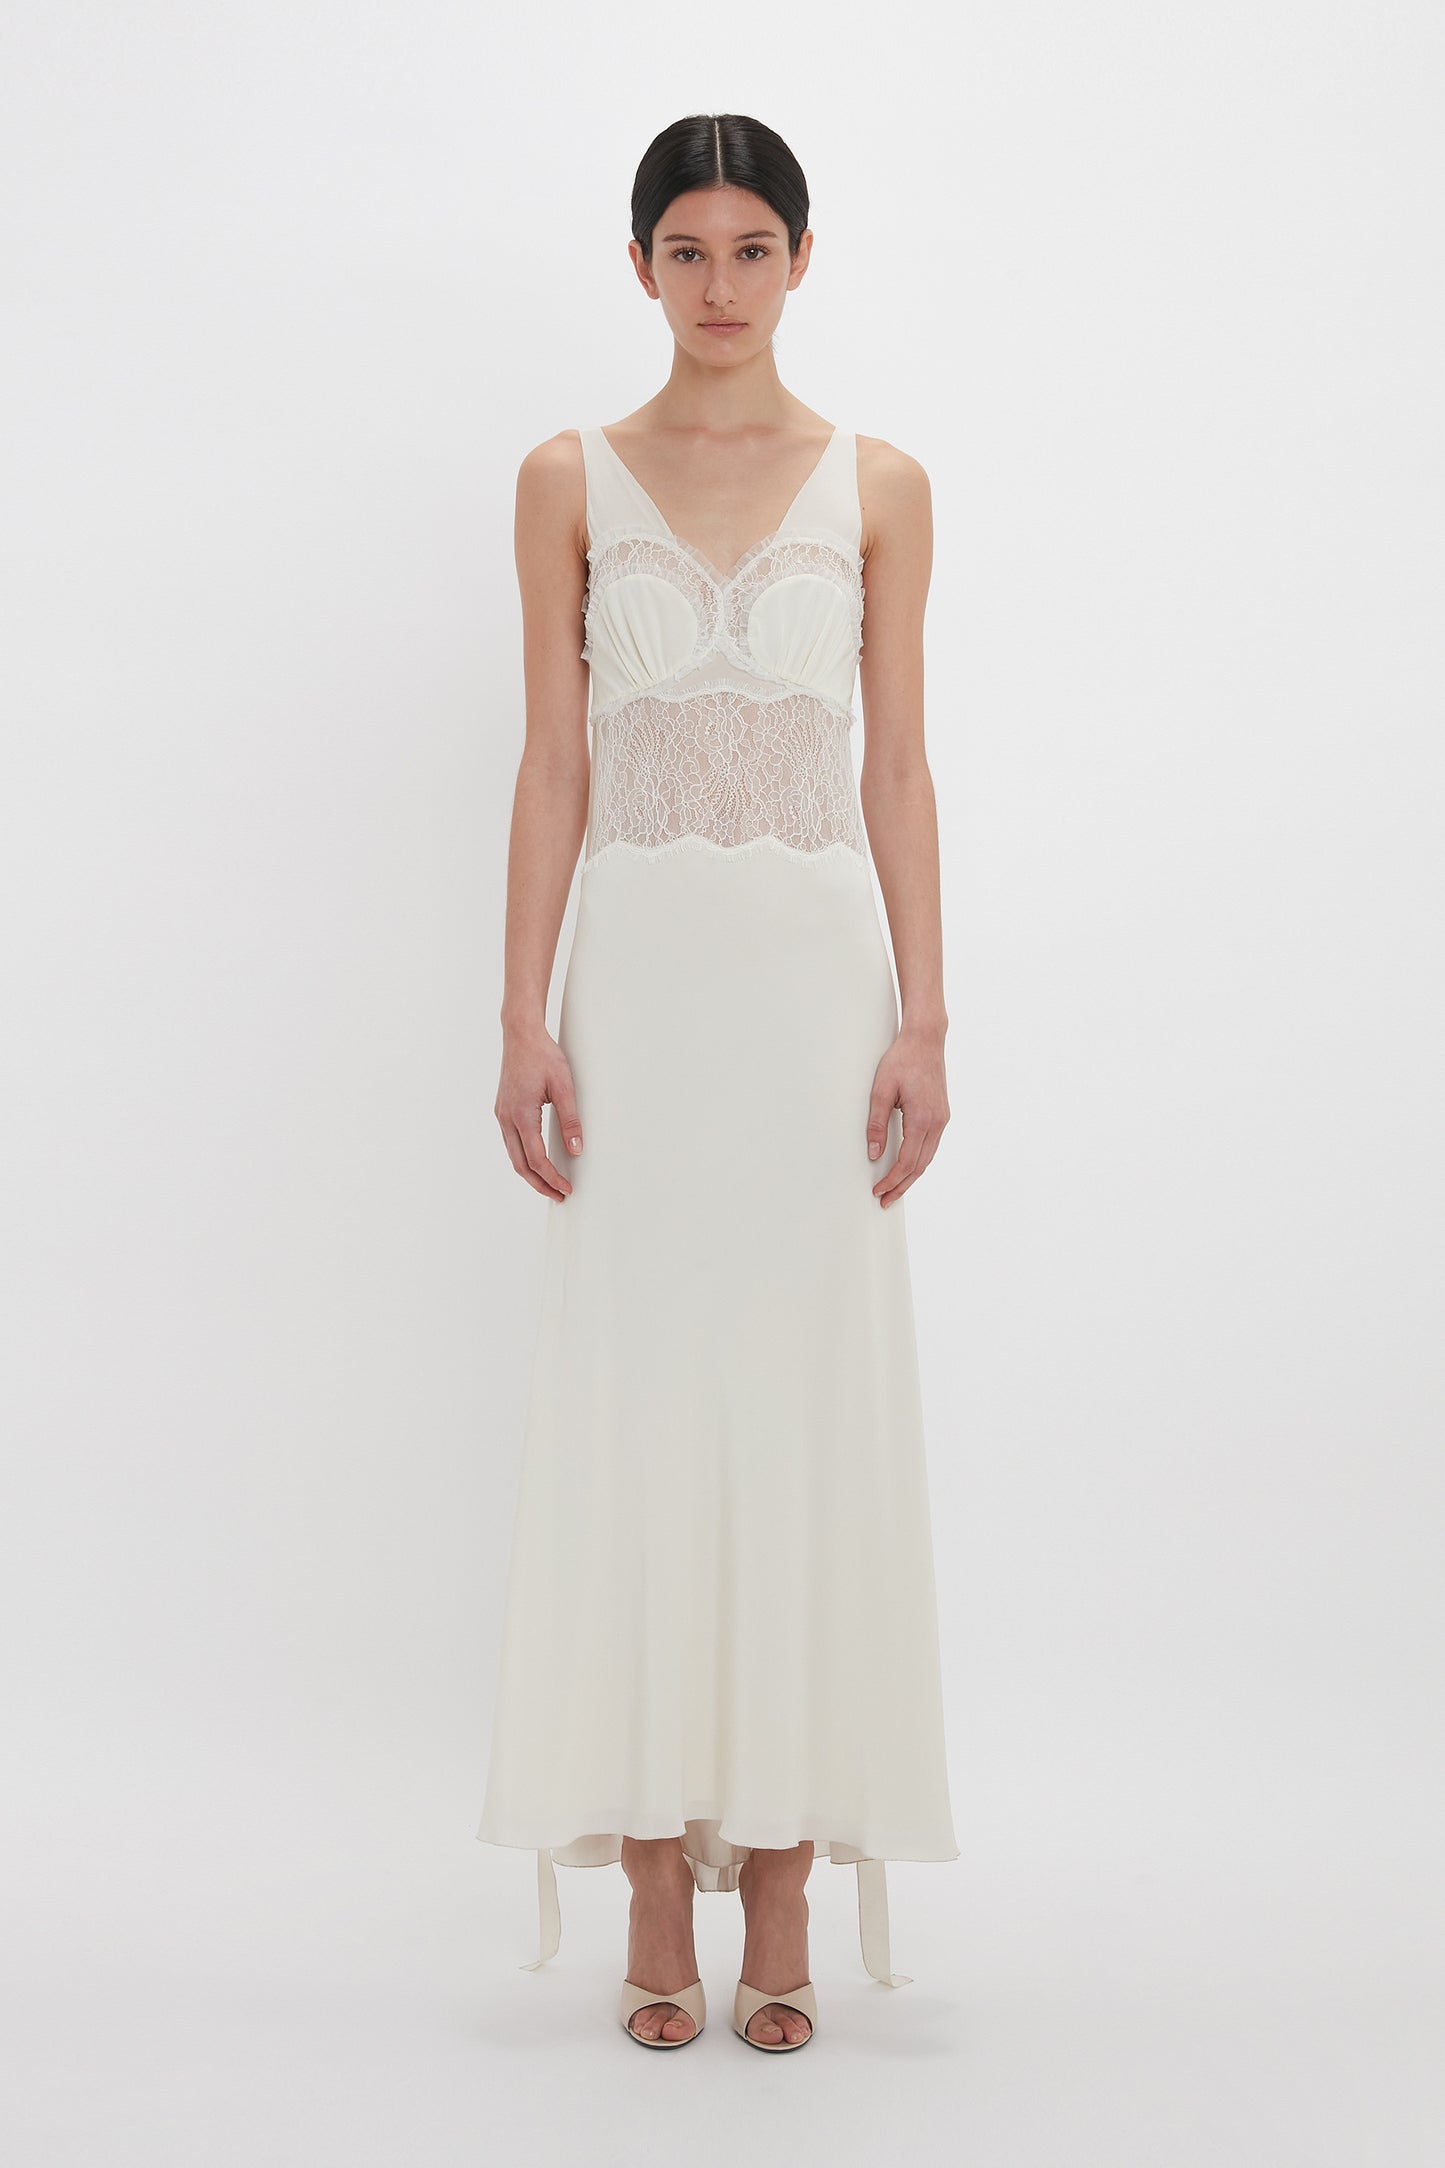 A person is wearing a sleeveless, floor-length, Ruffle Detail Midi Dress in Ivory by Victoria Beckham, standing against a plain white background.